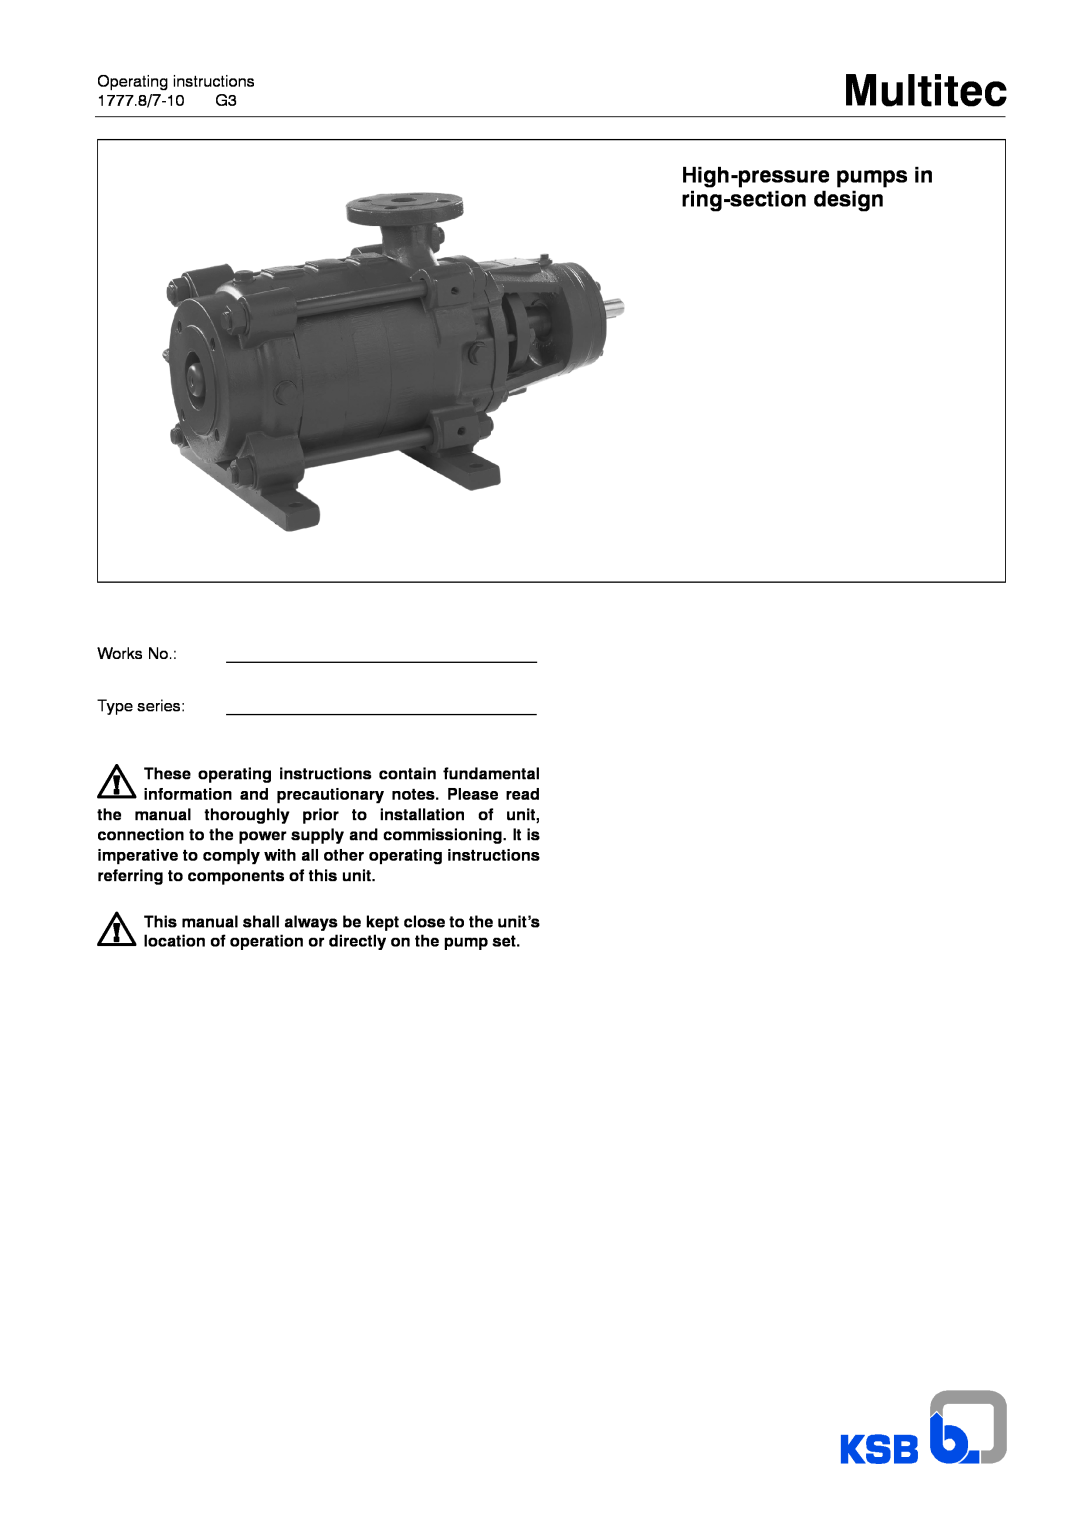 Multitech 1777.8/7-10 G3 operating instructions High-pressurepumps in ring-sectiondesign, Multitec 